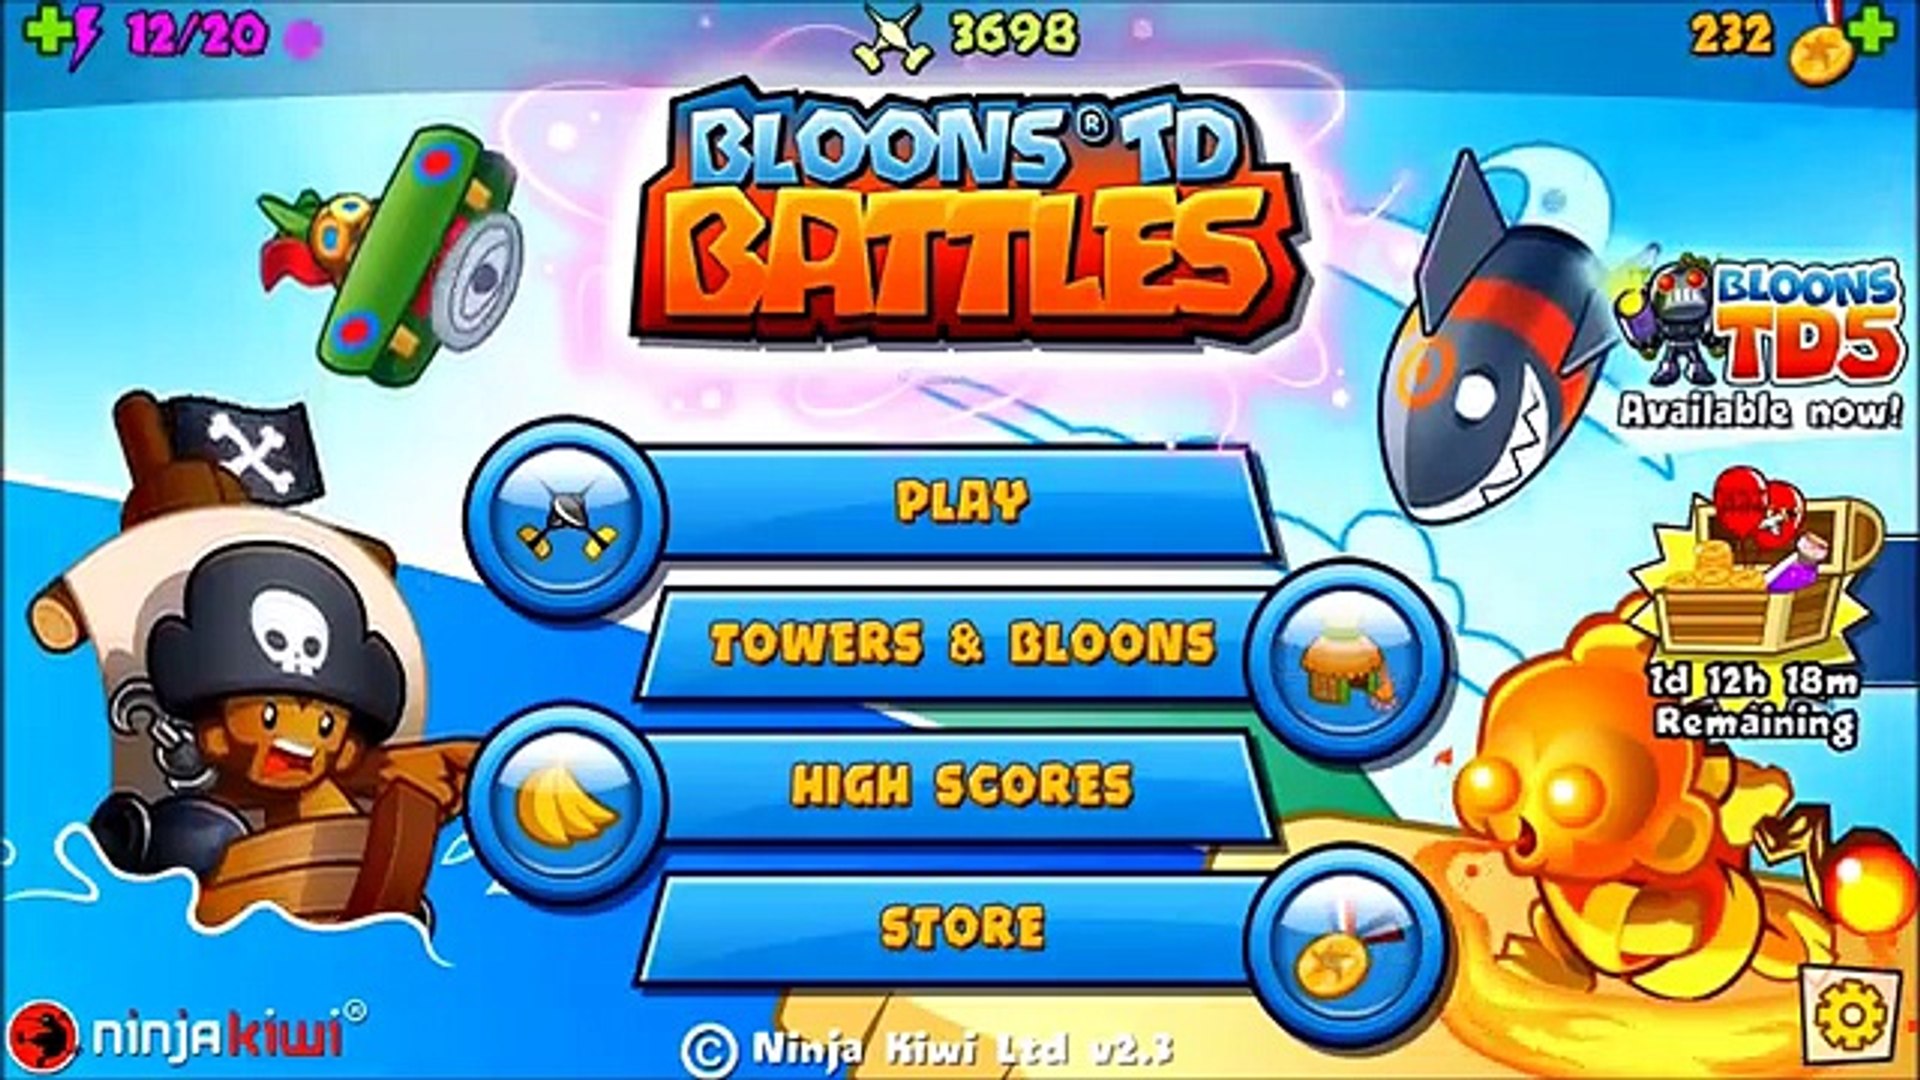 The Bloontonium Mine Strategy Guide Bloons Td Battles Defense